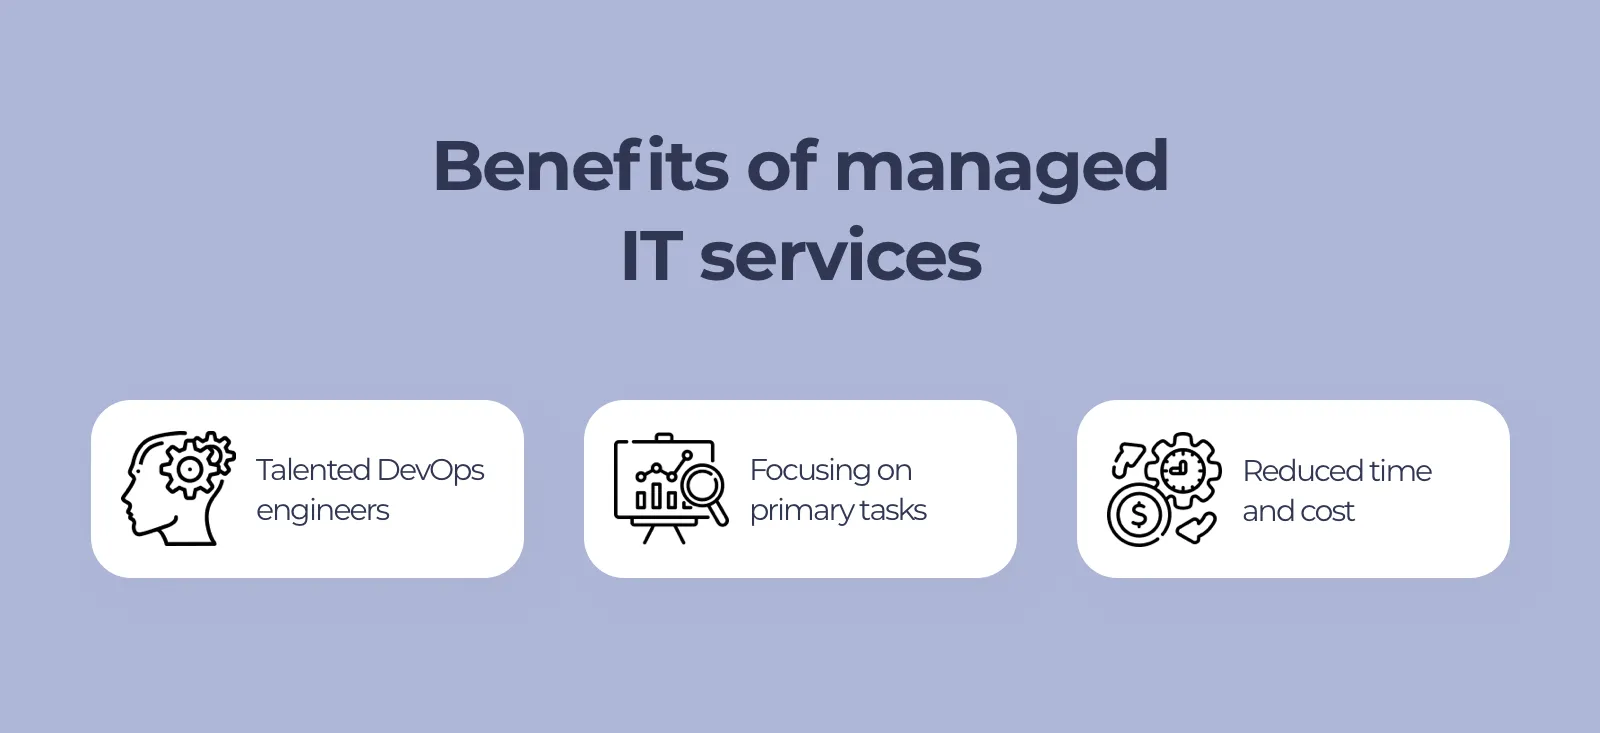 Average cost of managed IT services